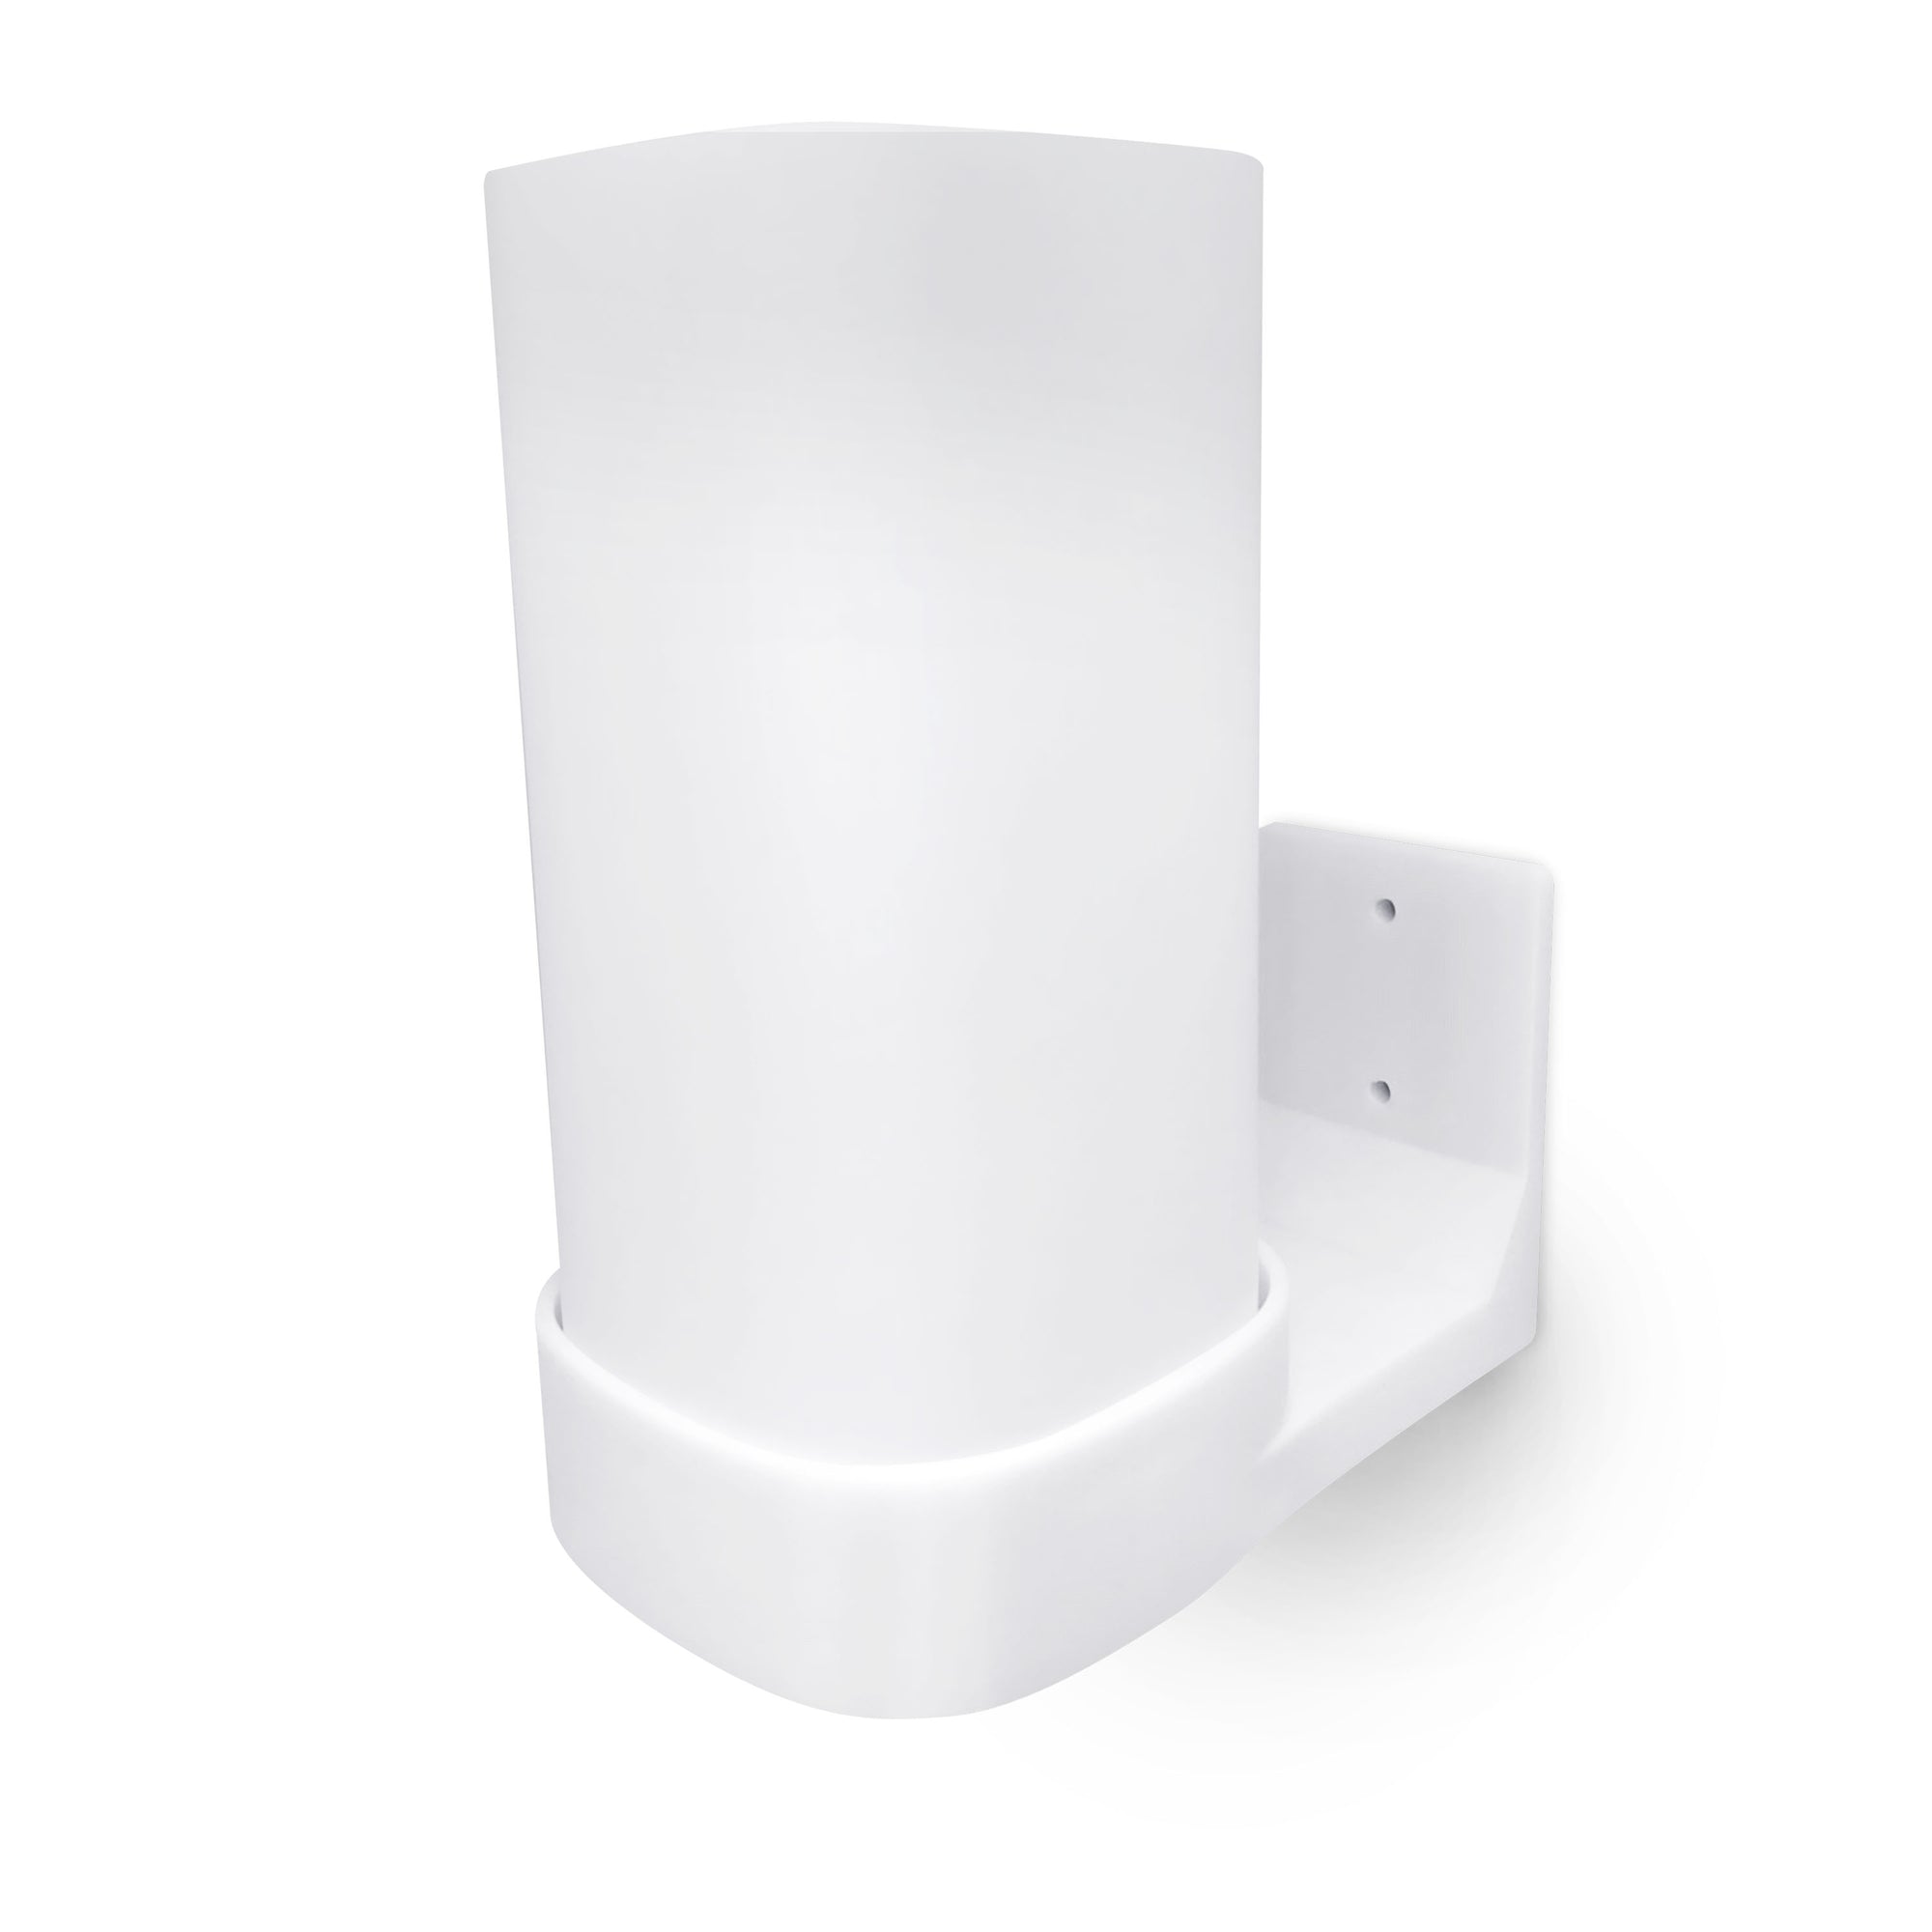 Screwless Wall Mount for Linksys Velop Pro 6E (AXE5400) Wifi Mesh Router, Easy To Install Holder, Adhesive & Screw Mounting Option